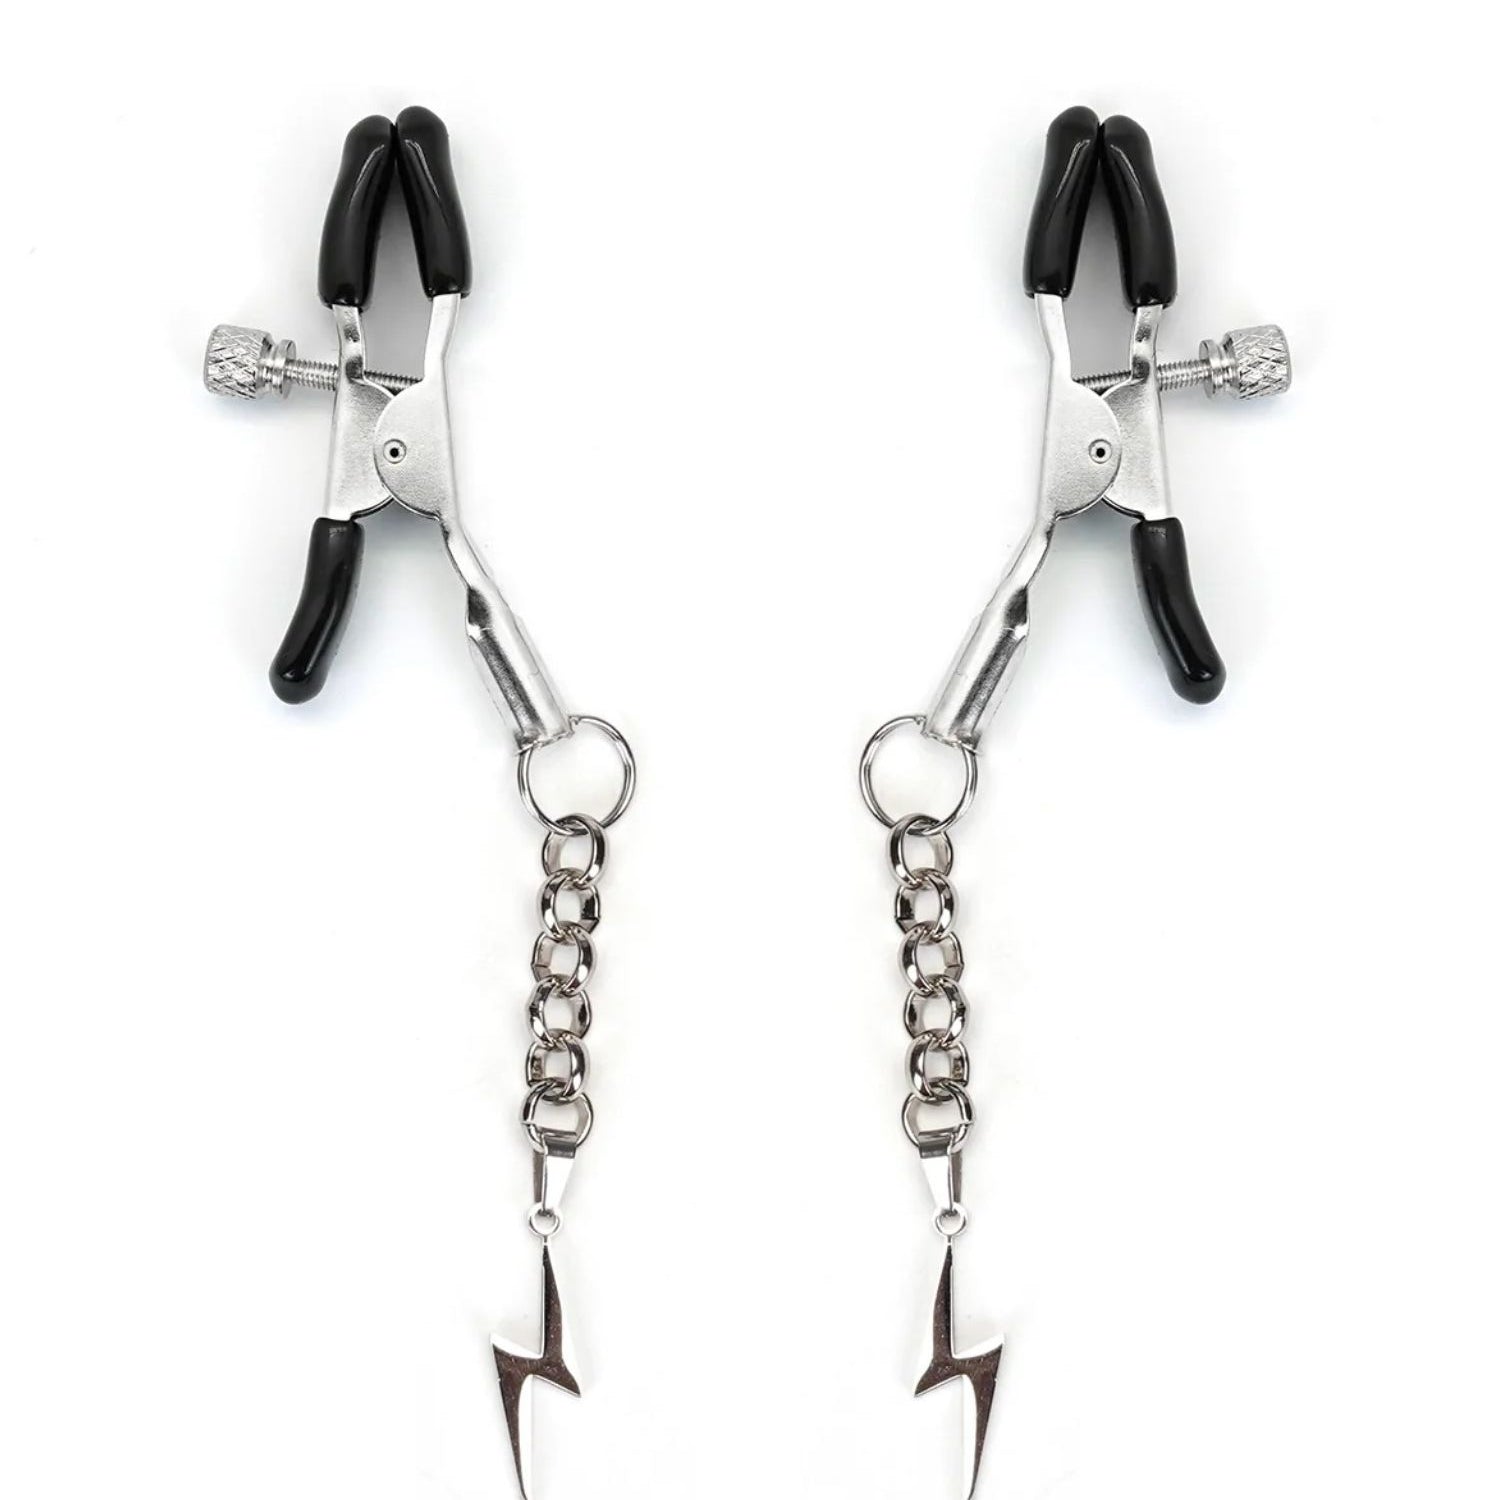 Liebe Seele Silver Lightning Nipple Clamps - Bedroom Fun | Avec Amour Lingerie